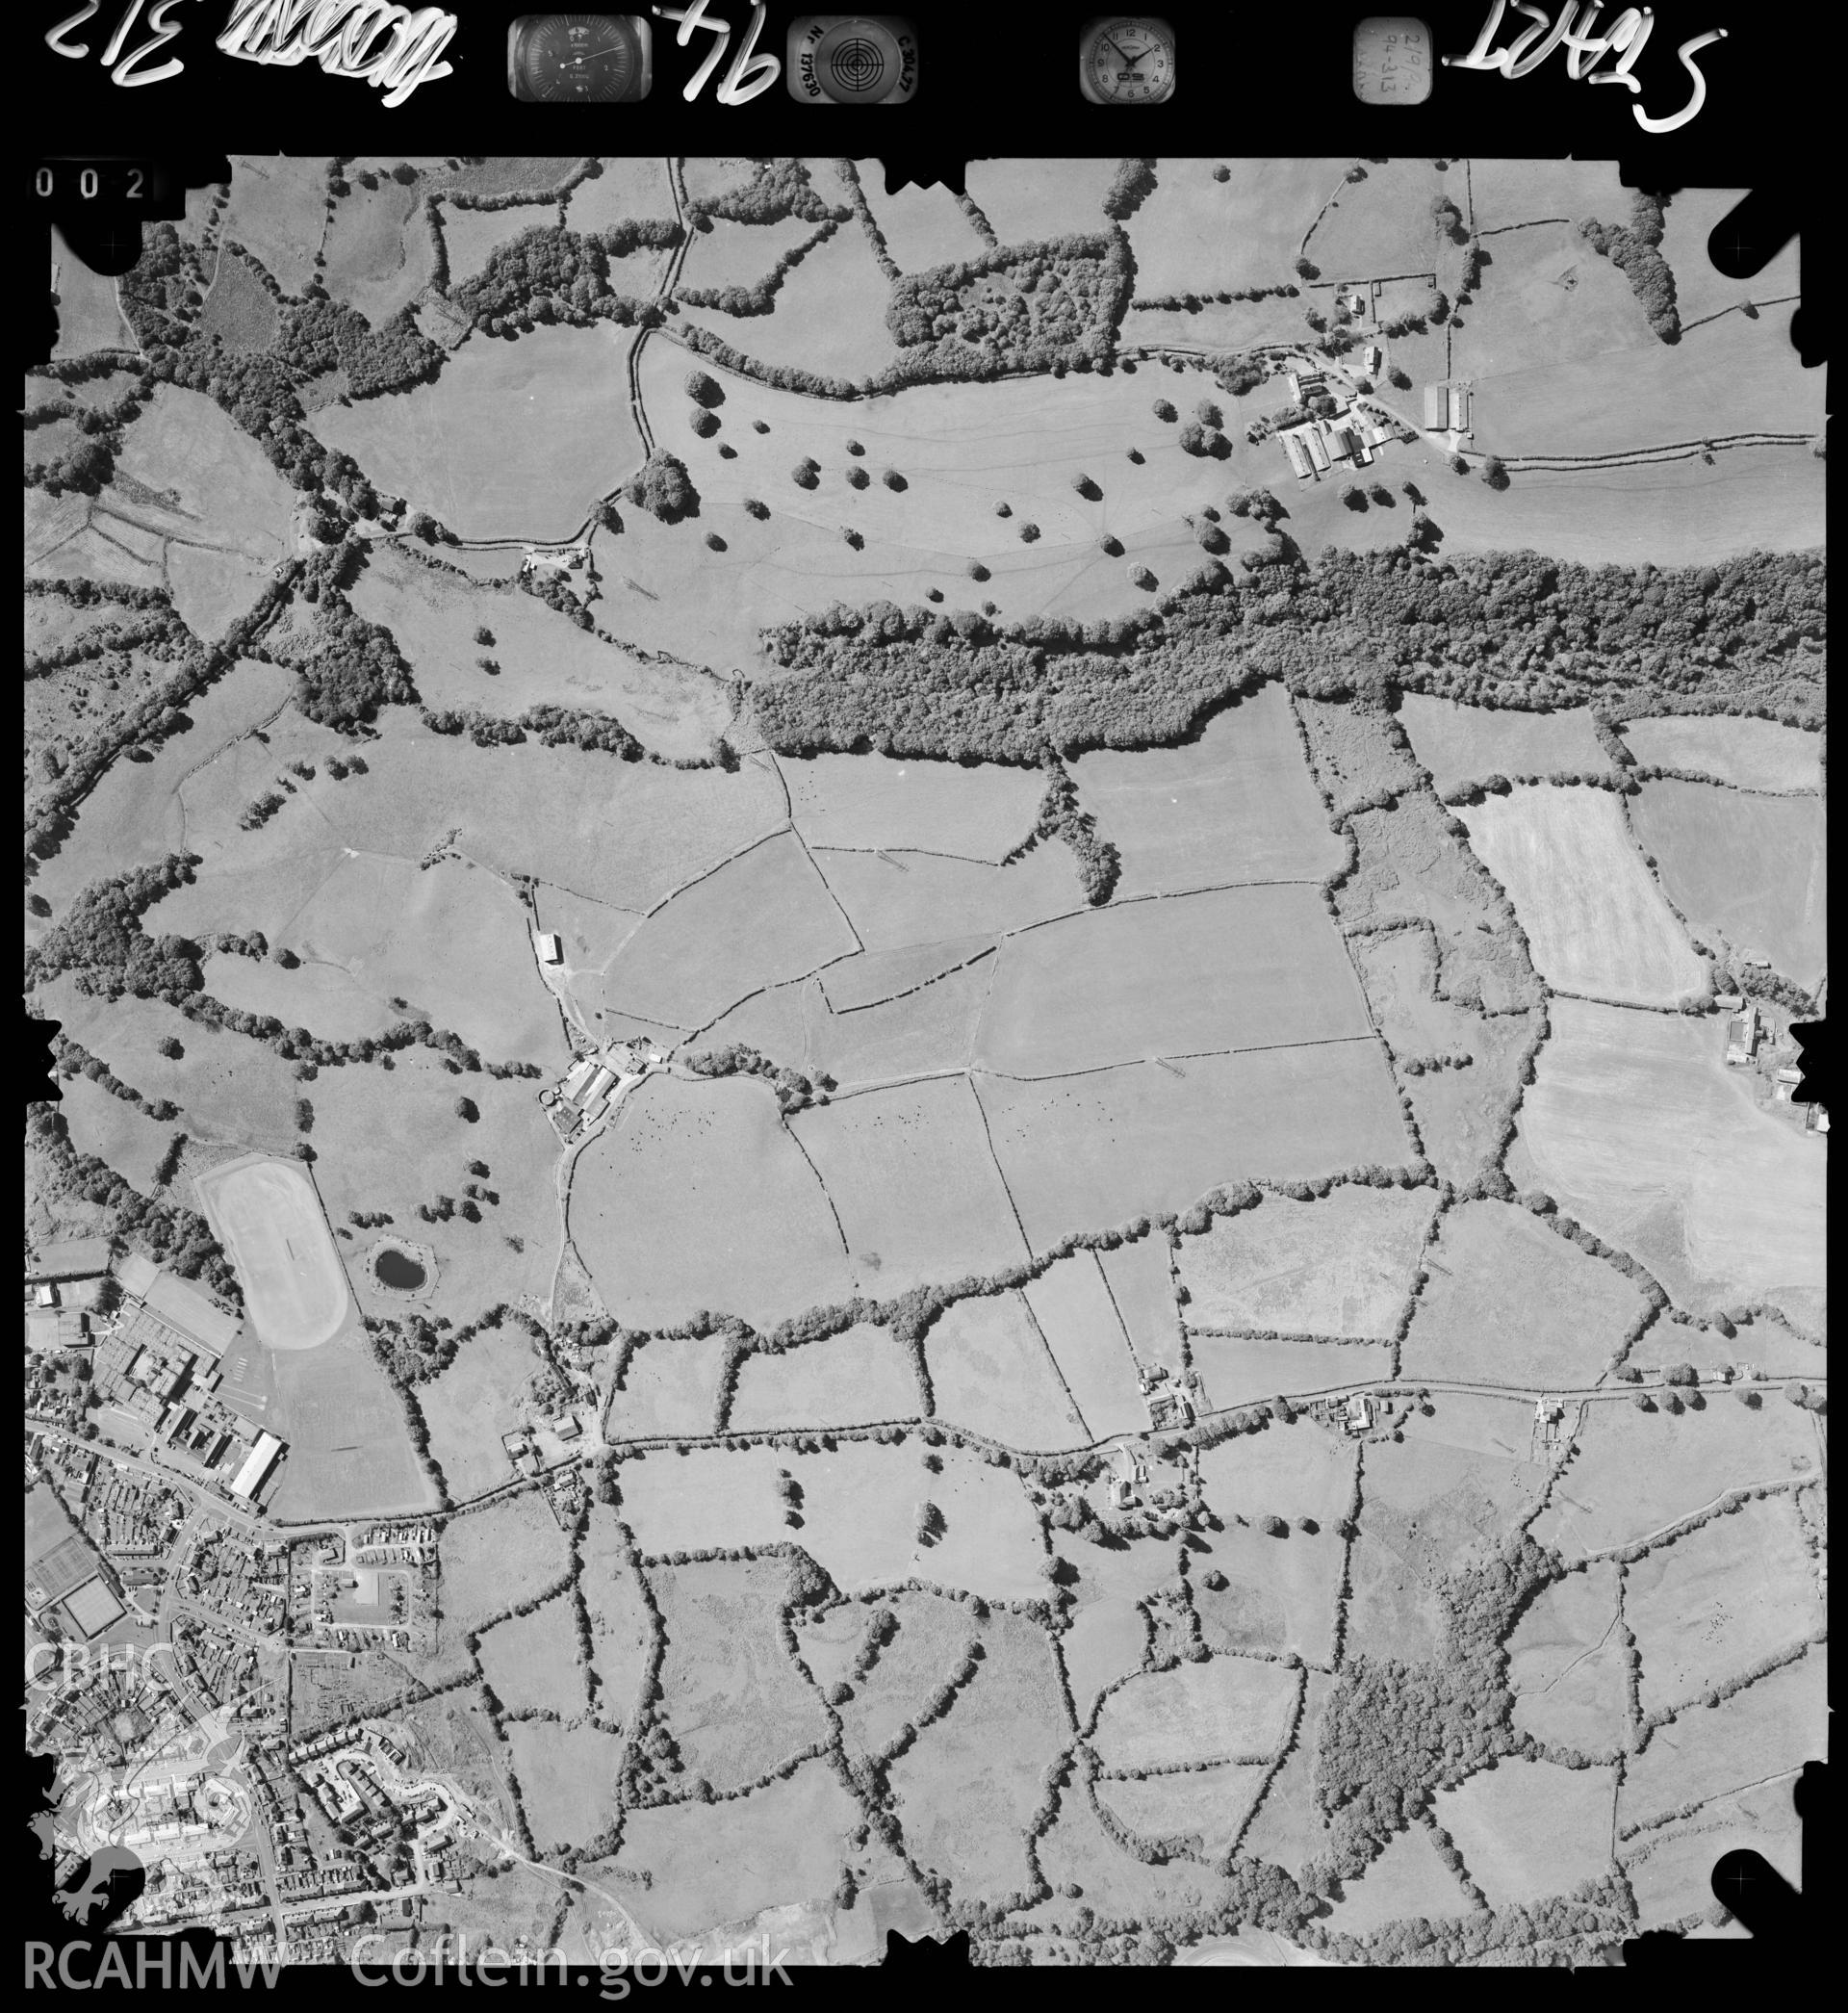 Digitized copy of an aerial photograph showing the Llantrisant area, taken by Ordnance Survey, 1994.